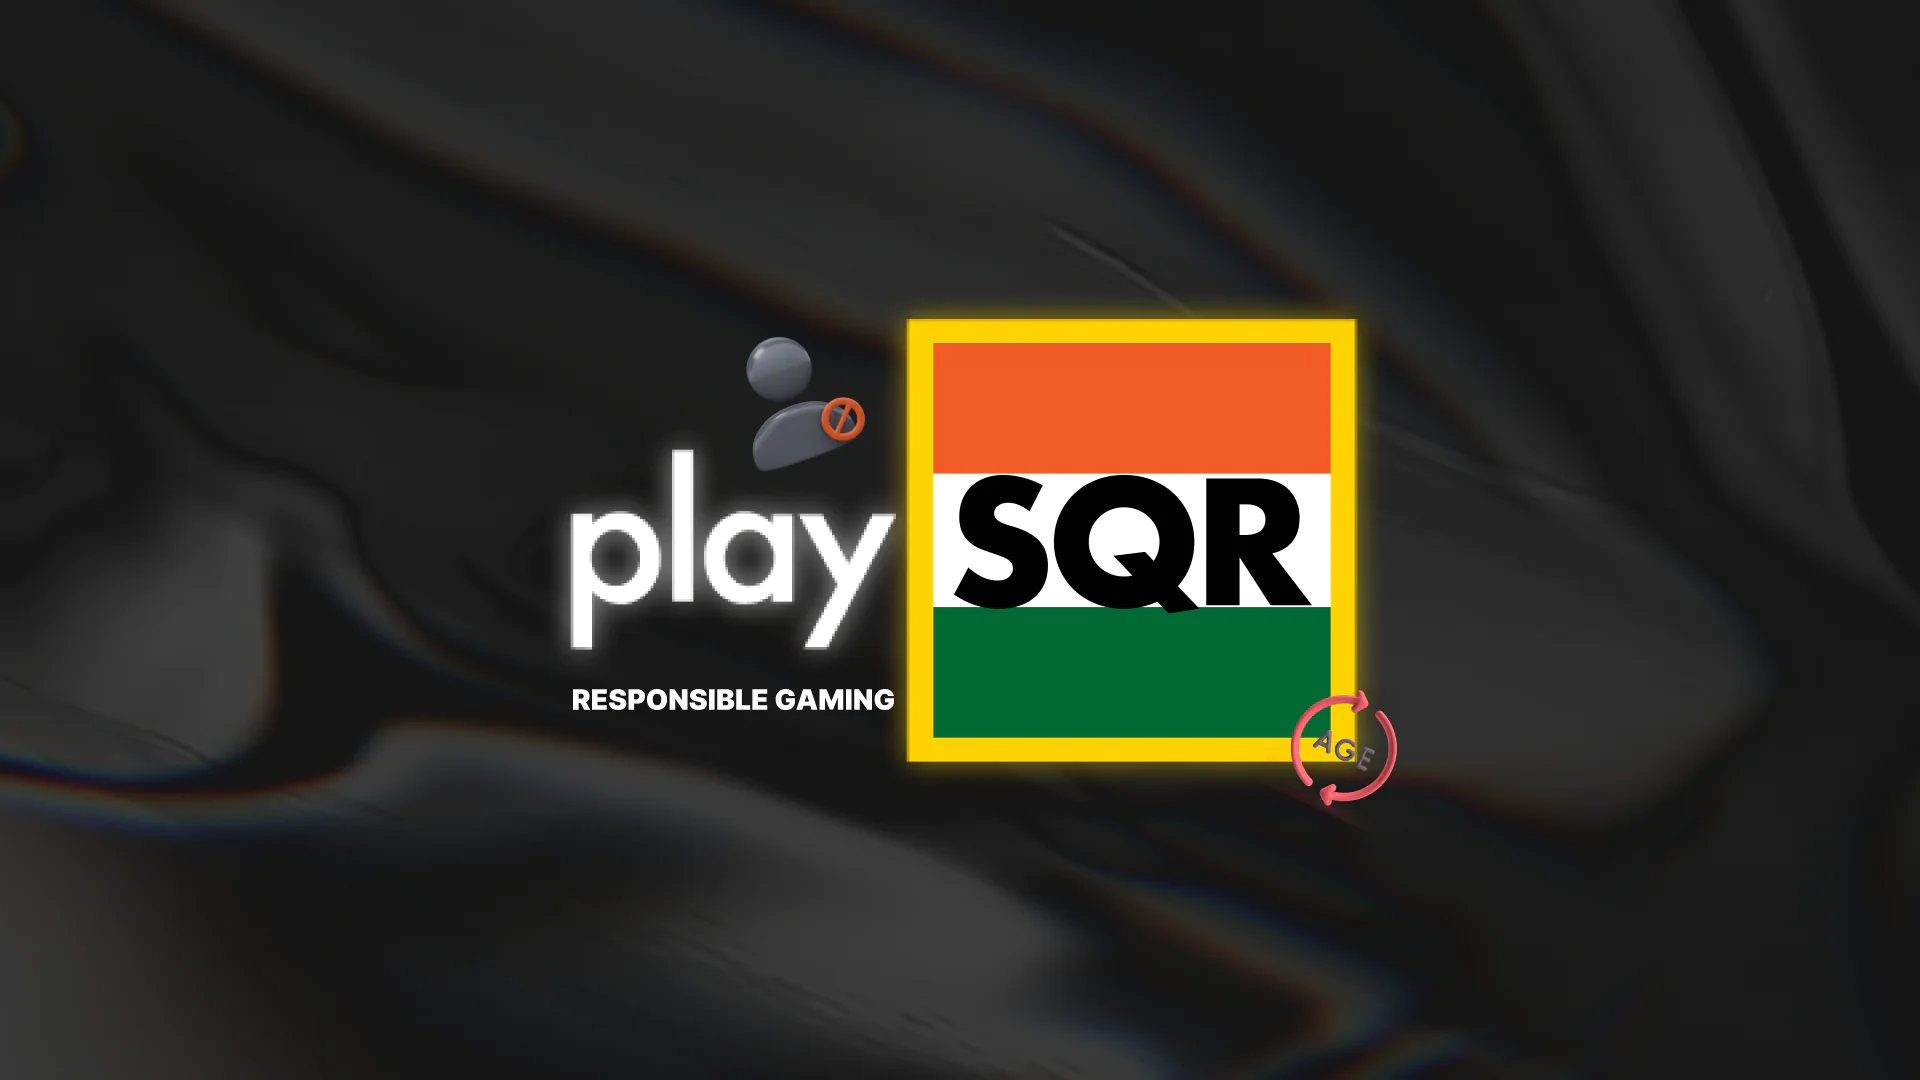 Learn more Information about PlaySQR Responsible Gaming